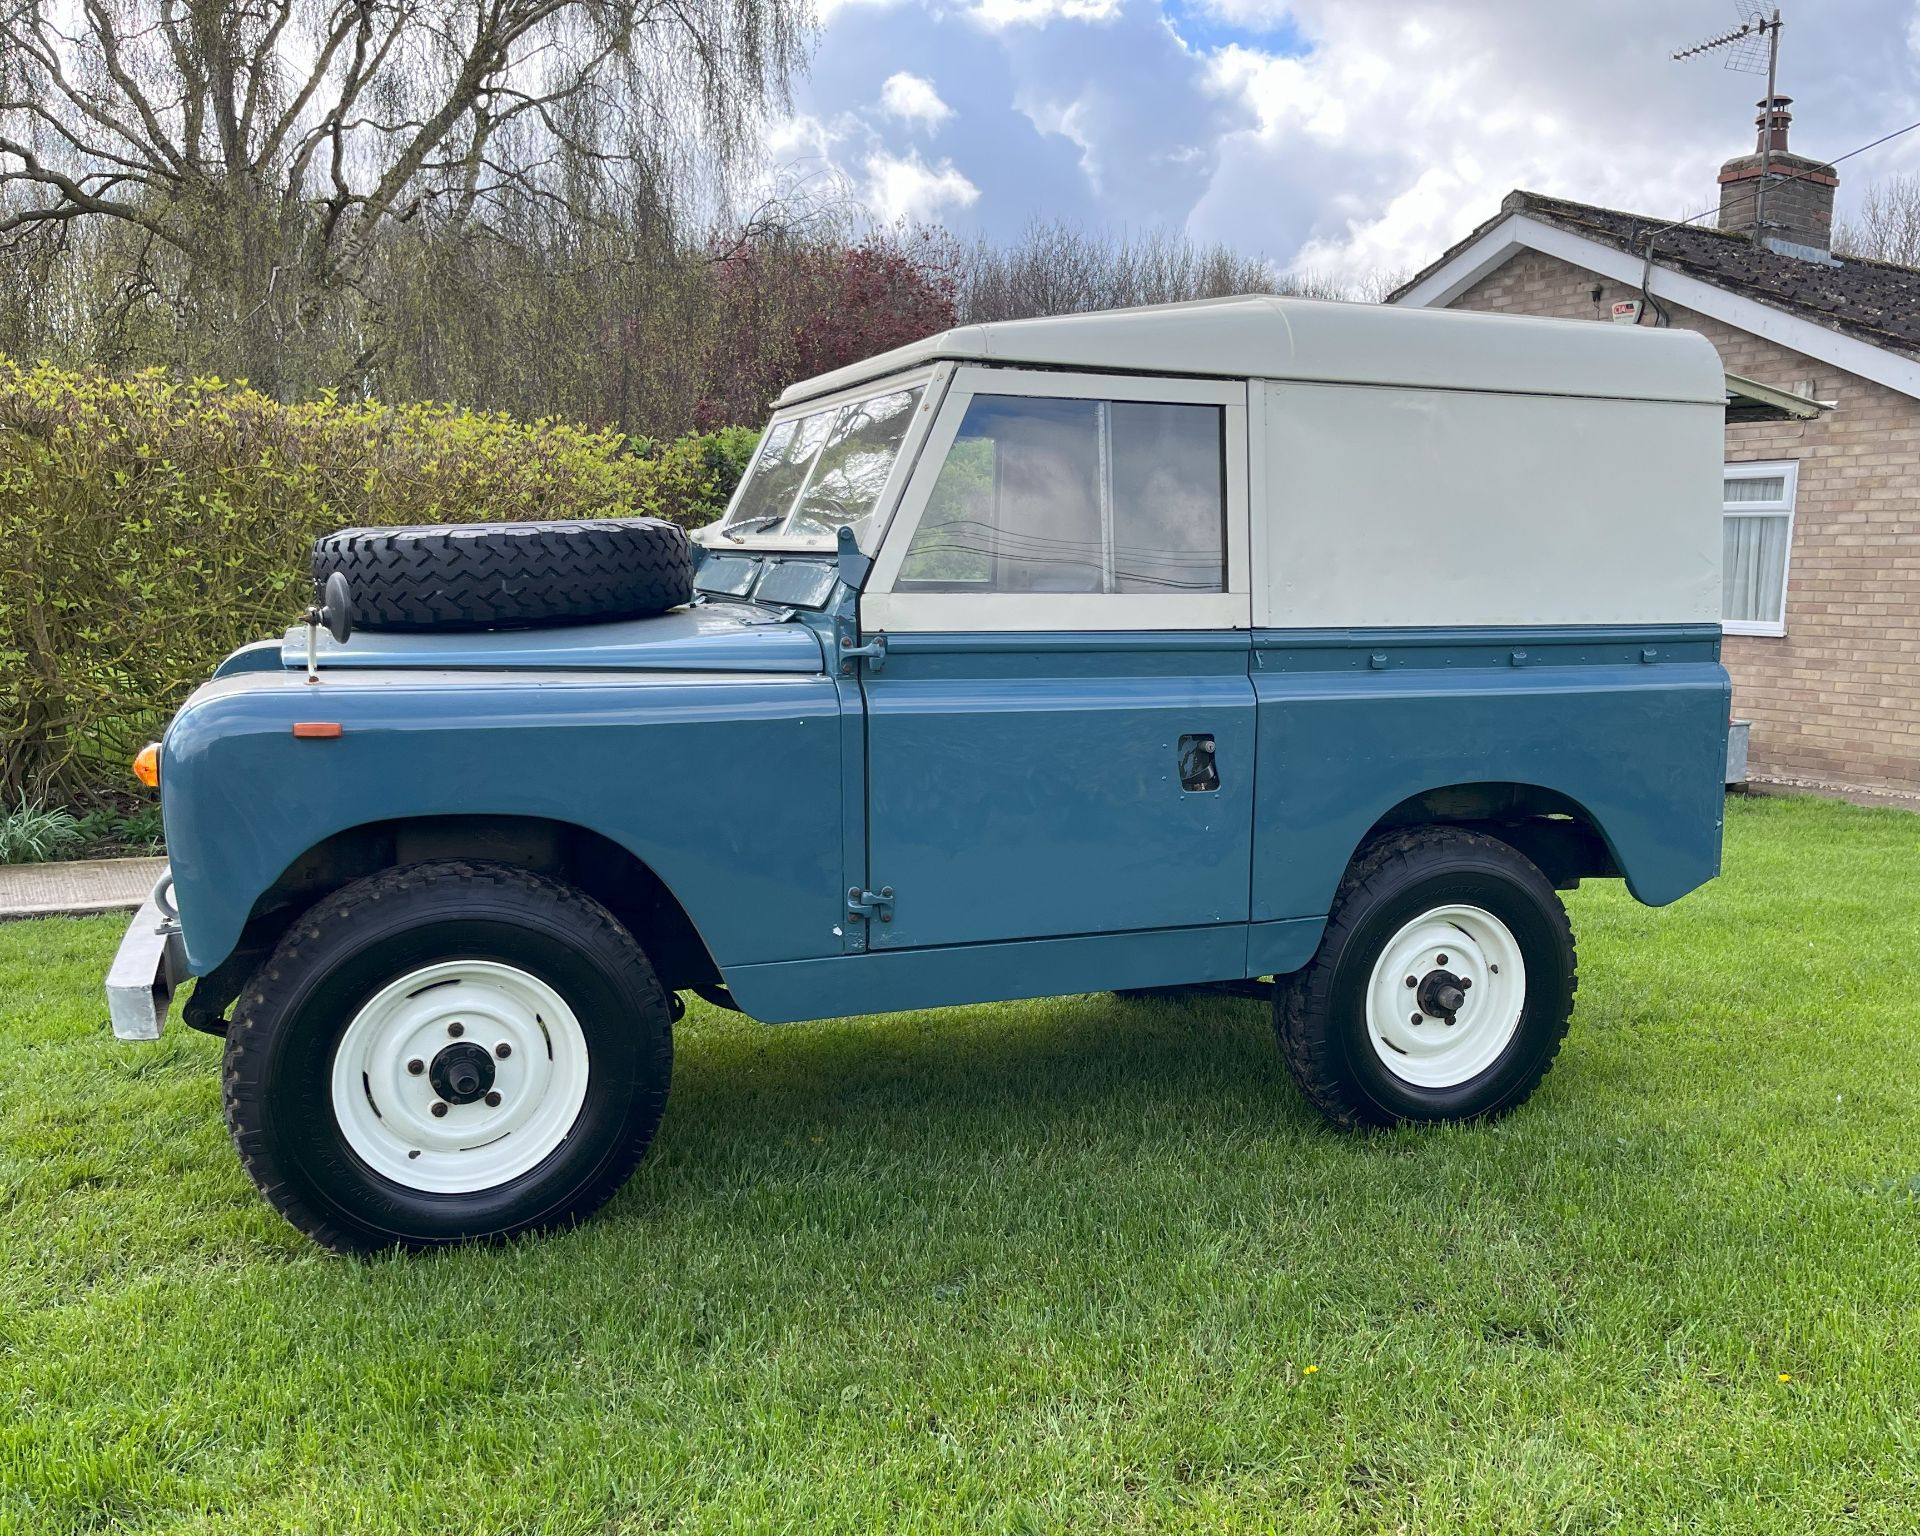 1962 Land Rover 88 Series II, petrol 2.25 litre engine, blue with 64,078 showing on the milometer, - Image 13 of 14